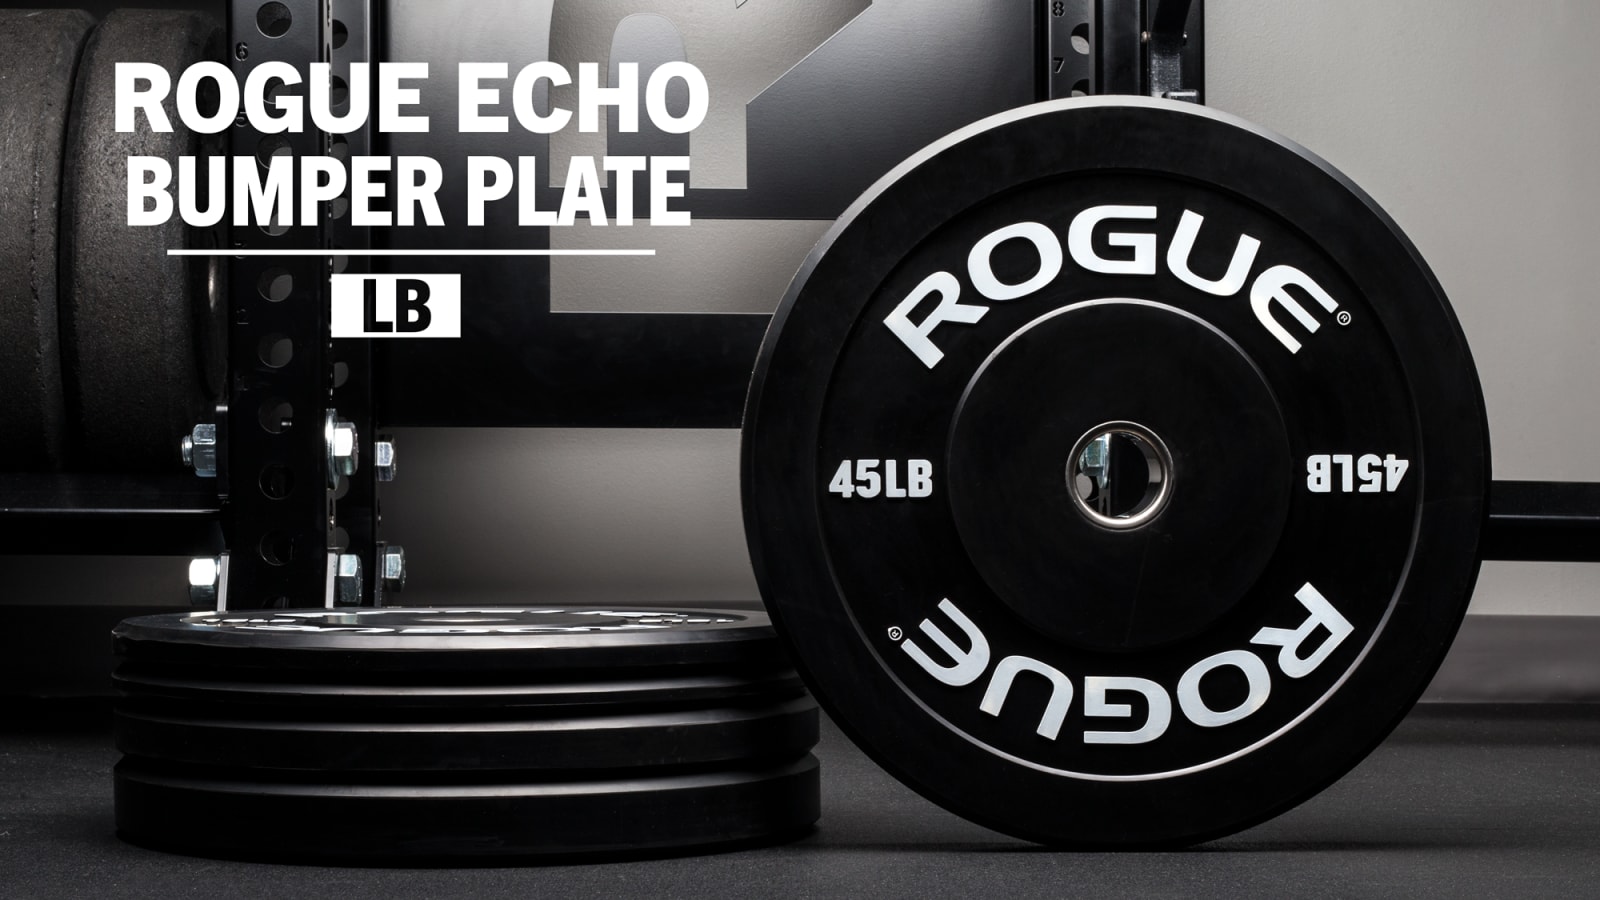 90 LB TOTAL Rogue Crossfit BRAND NEW 2 45lb ethos olympic bumper weight plates 